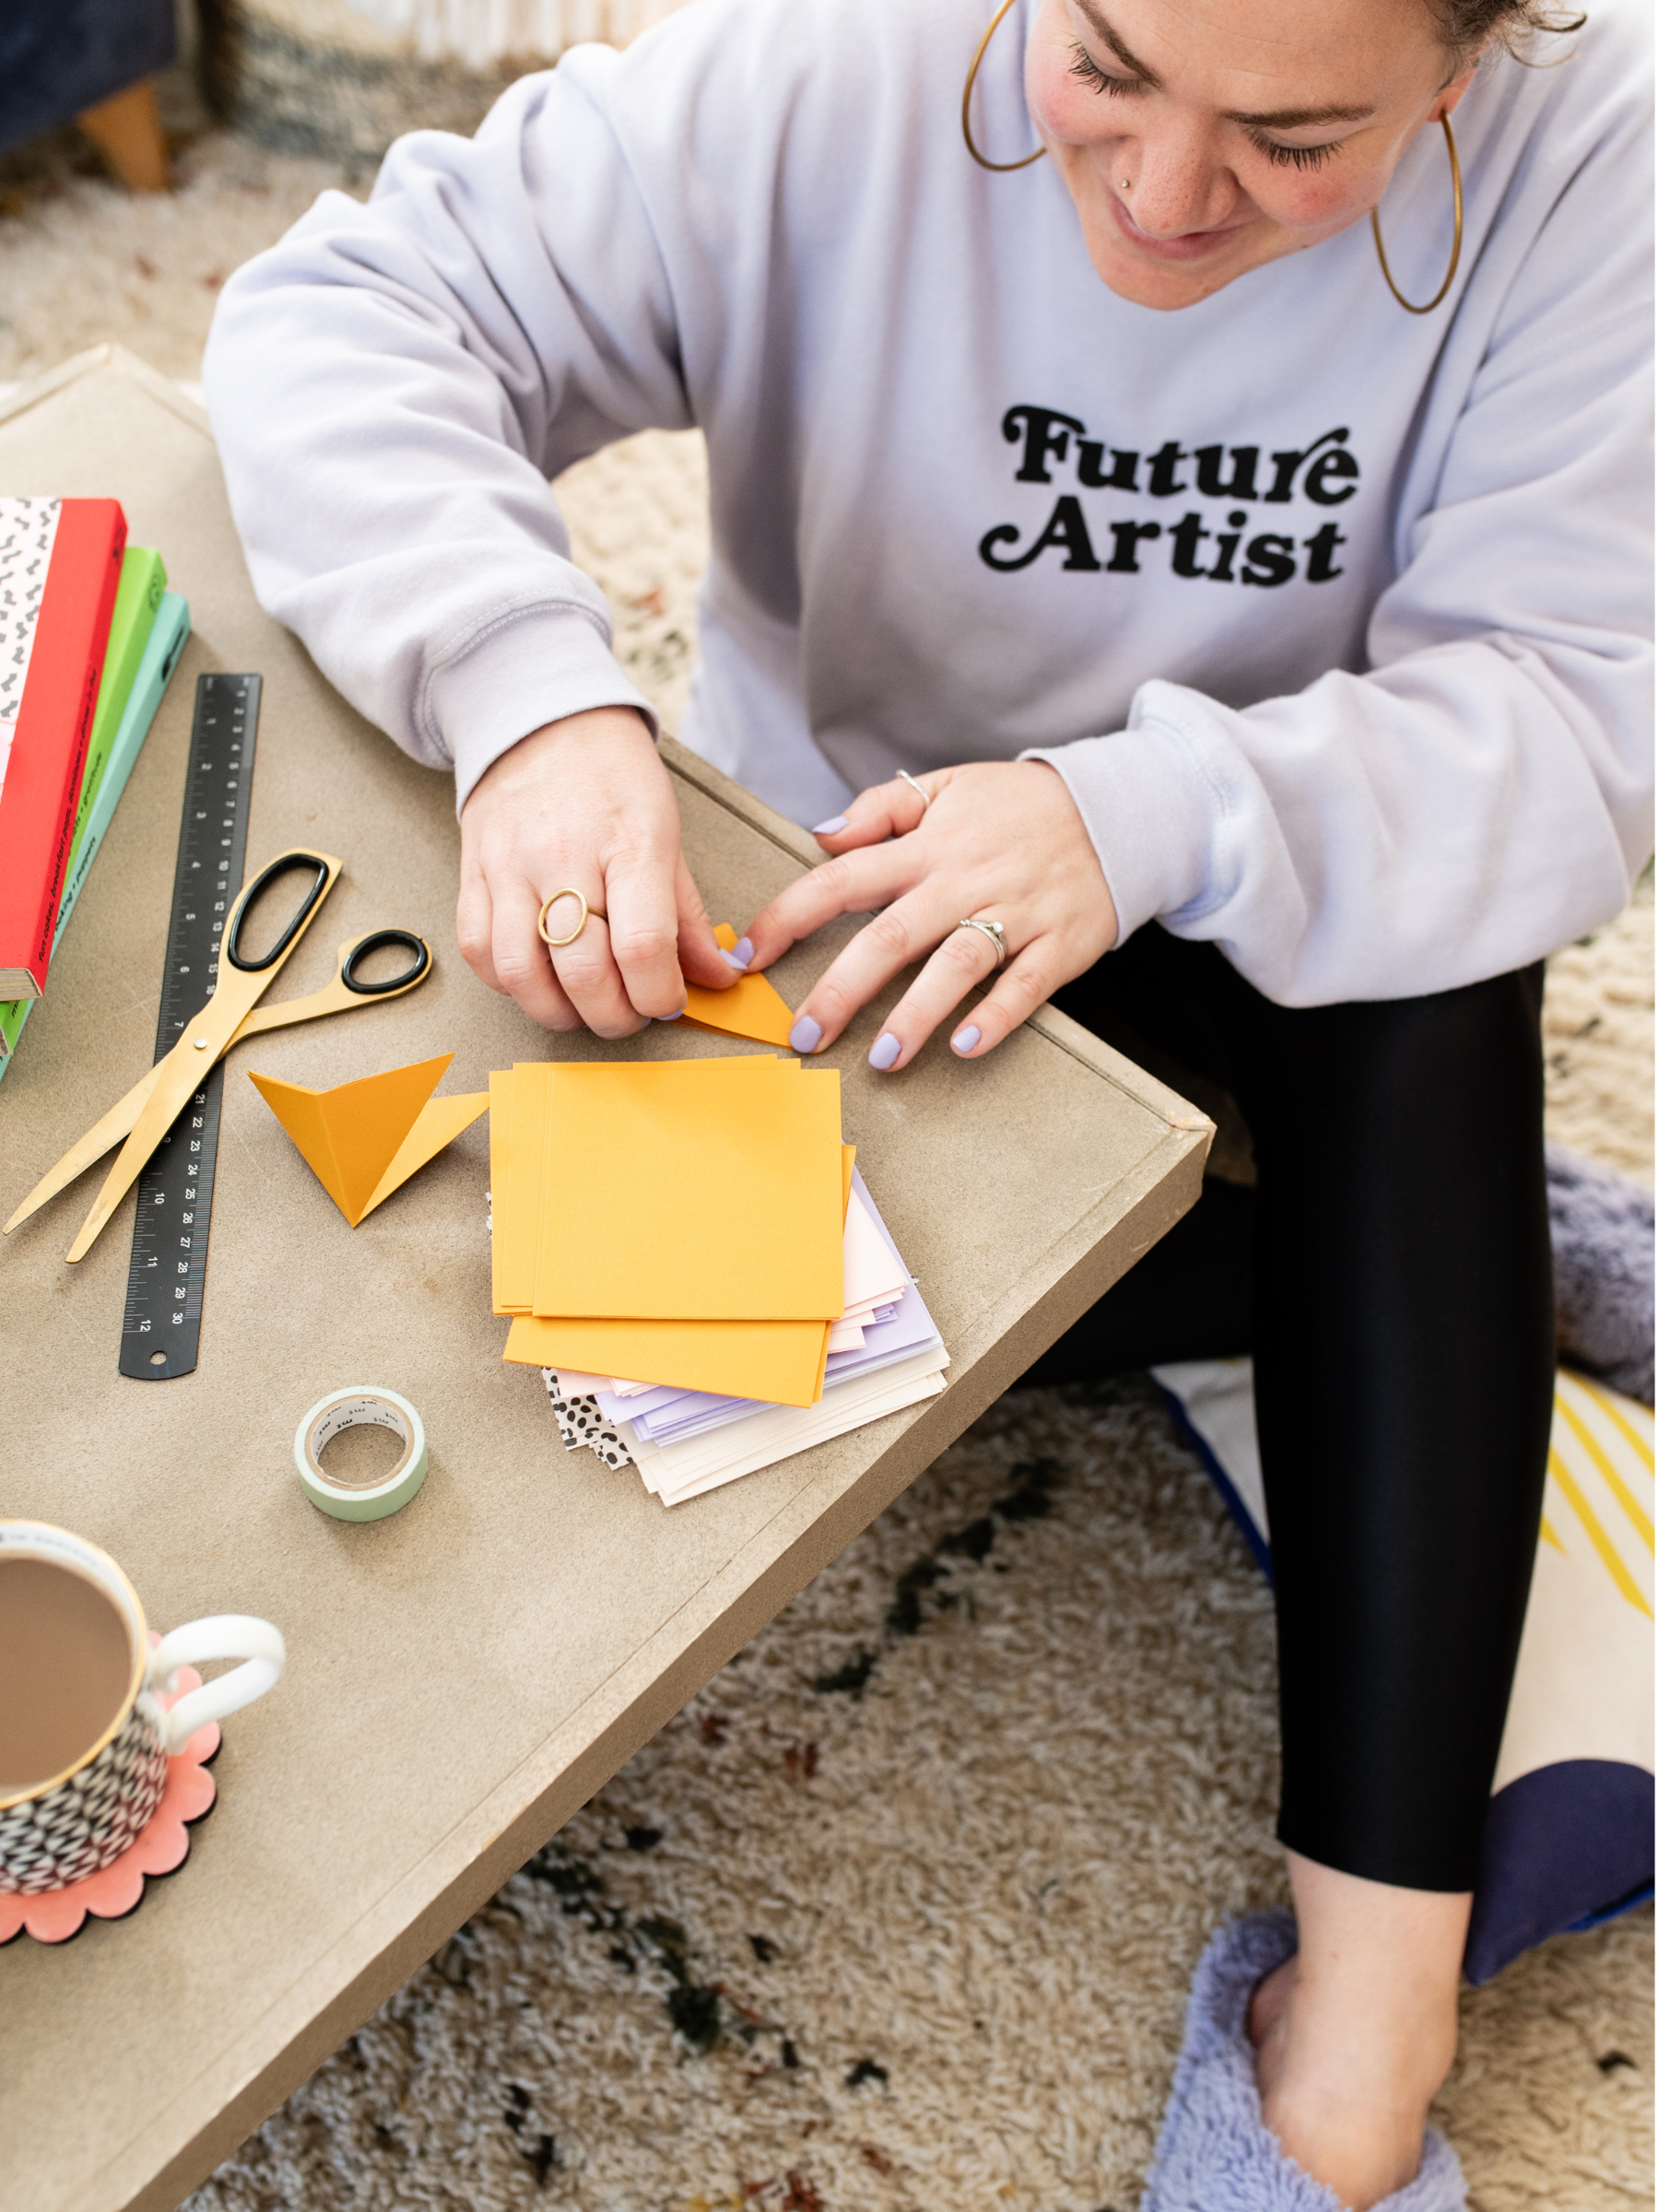 Woman is folding paper squares on a low rise table, with scissors and tools to hand. She's smiling as she folds.